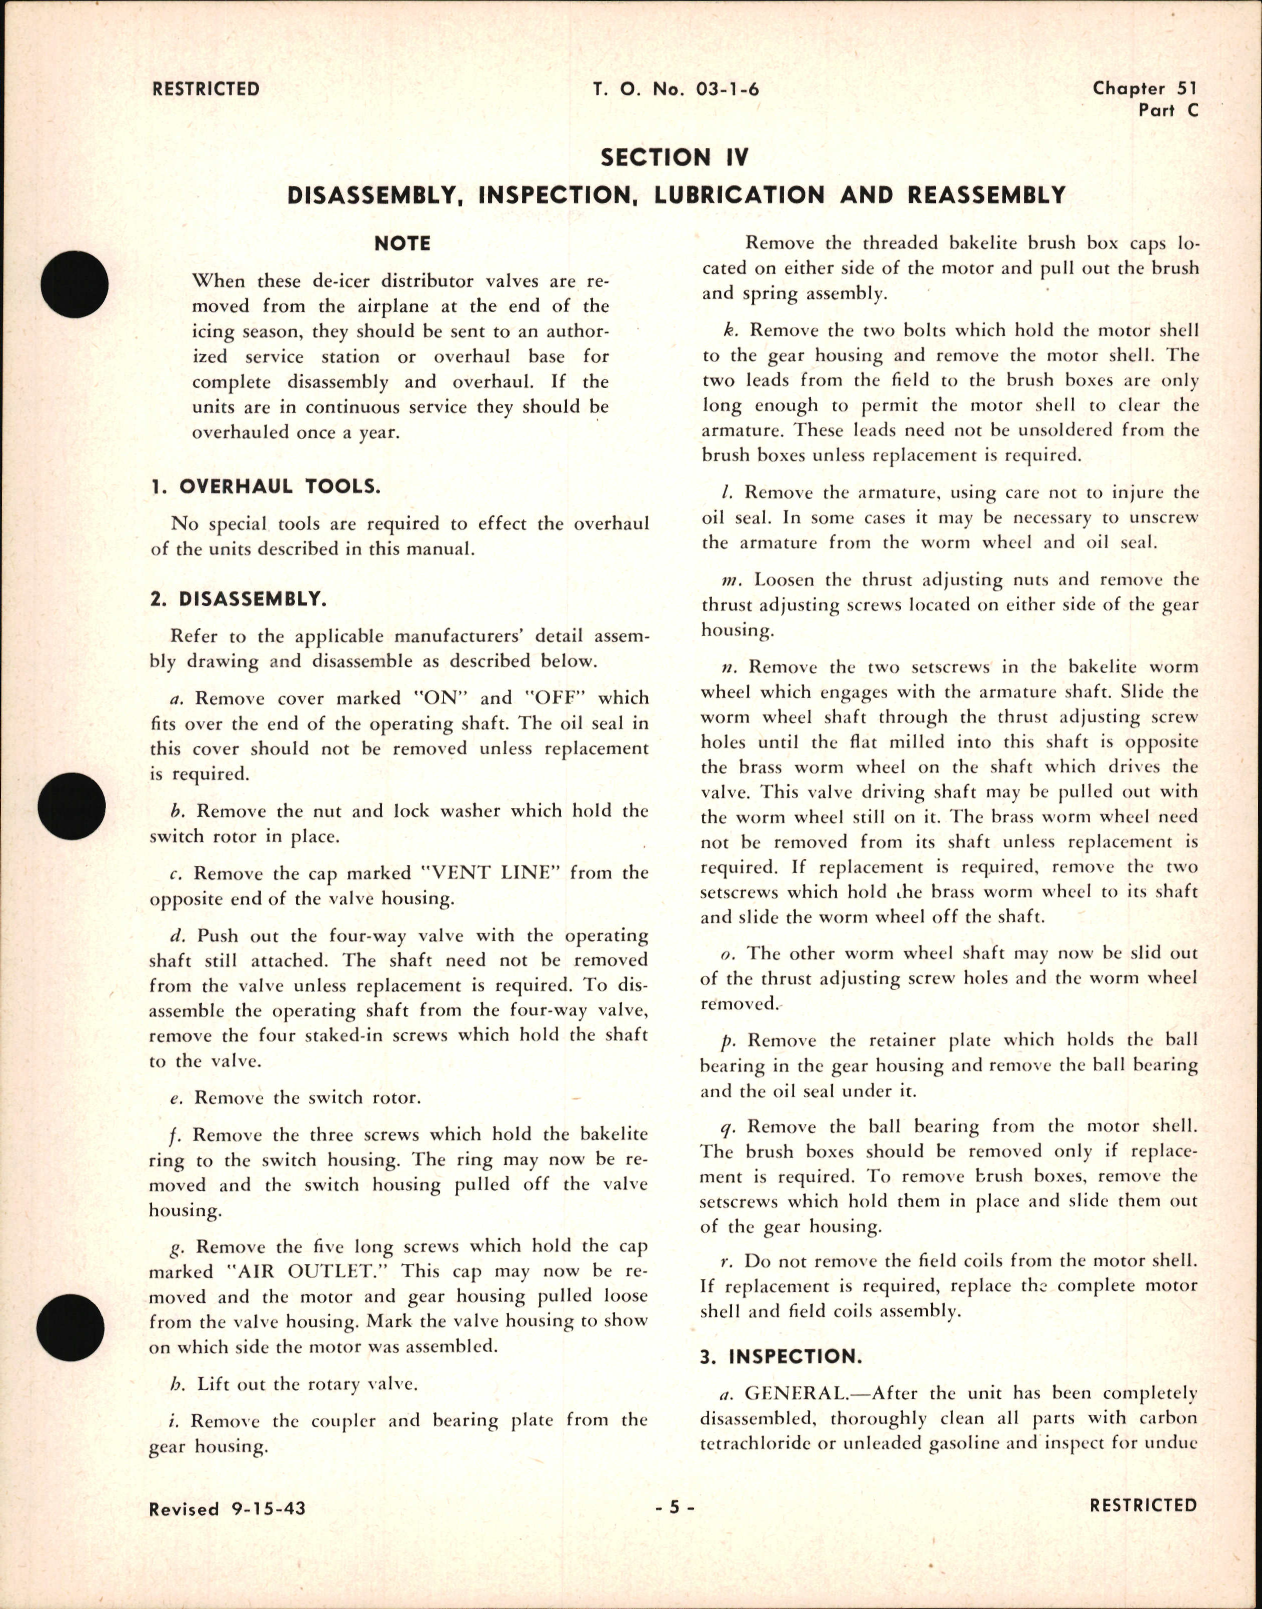 Sample page 5 from AirCorps Library document: Overhaul Instructions for De-Icer Distributing Valves, Ch 51 Part C